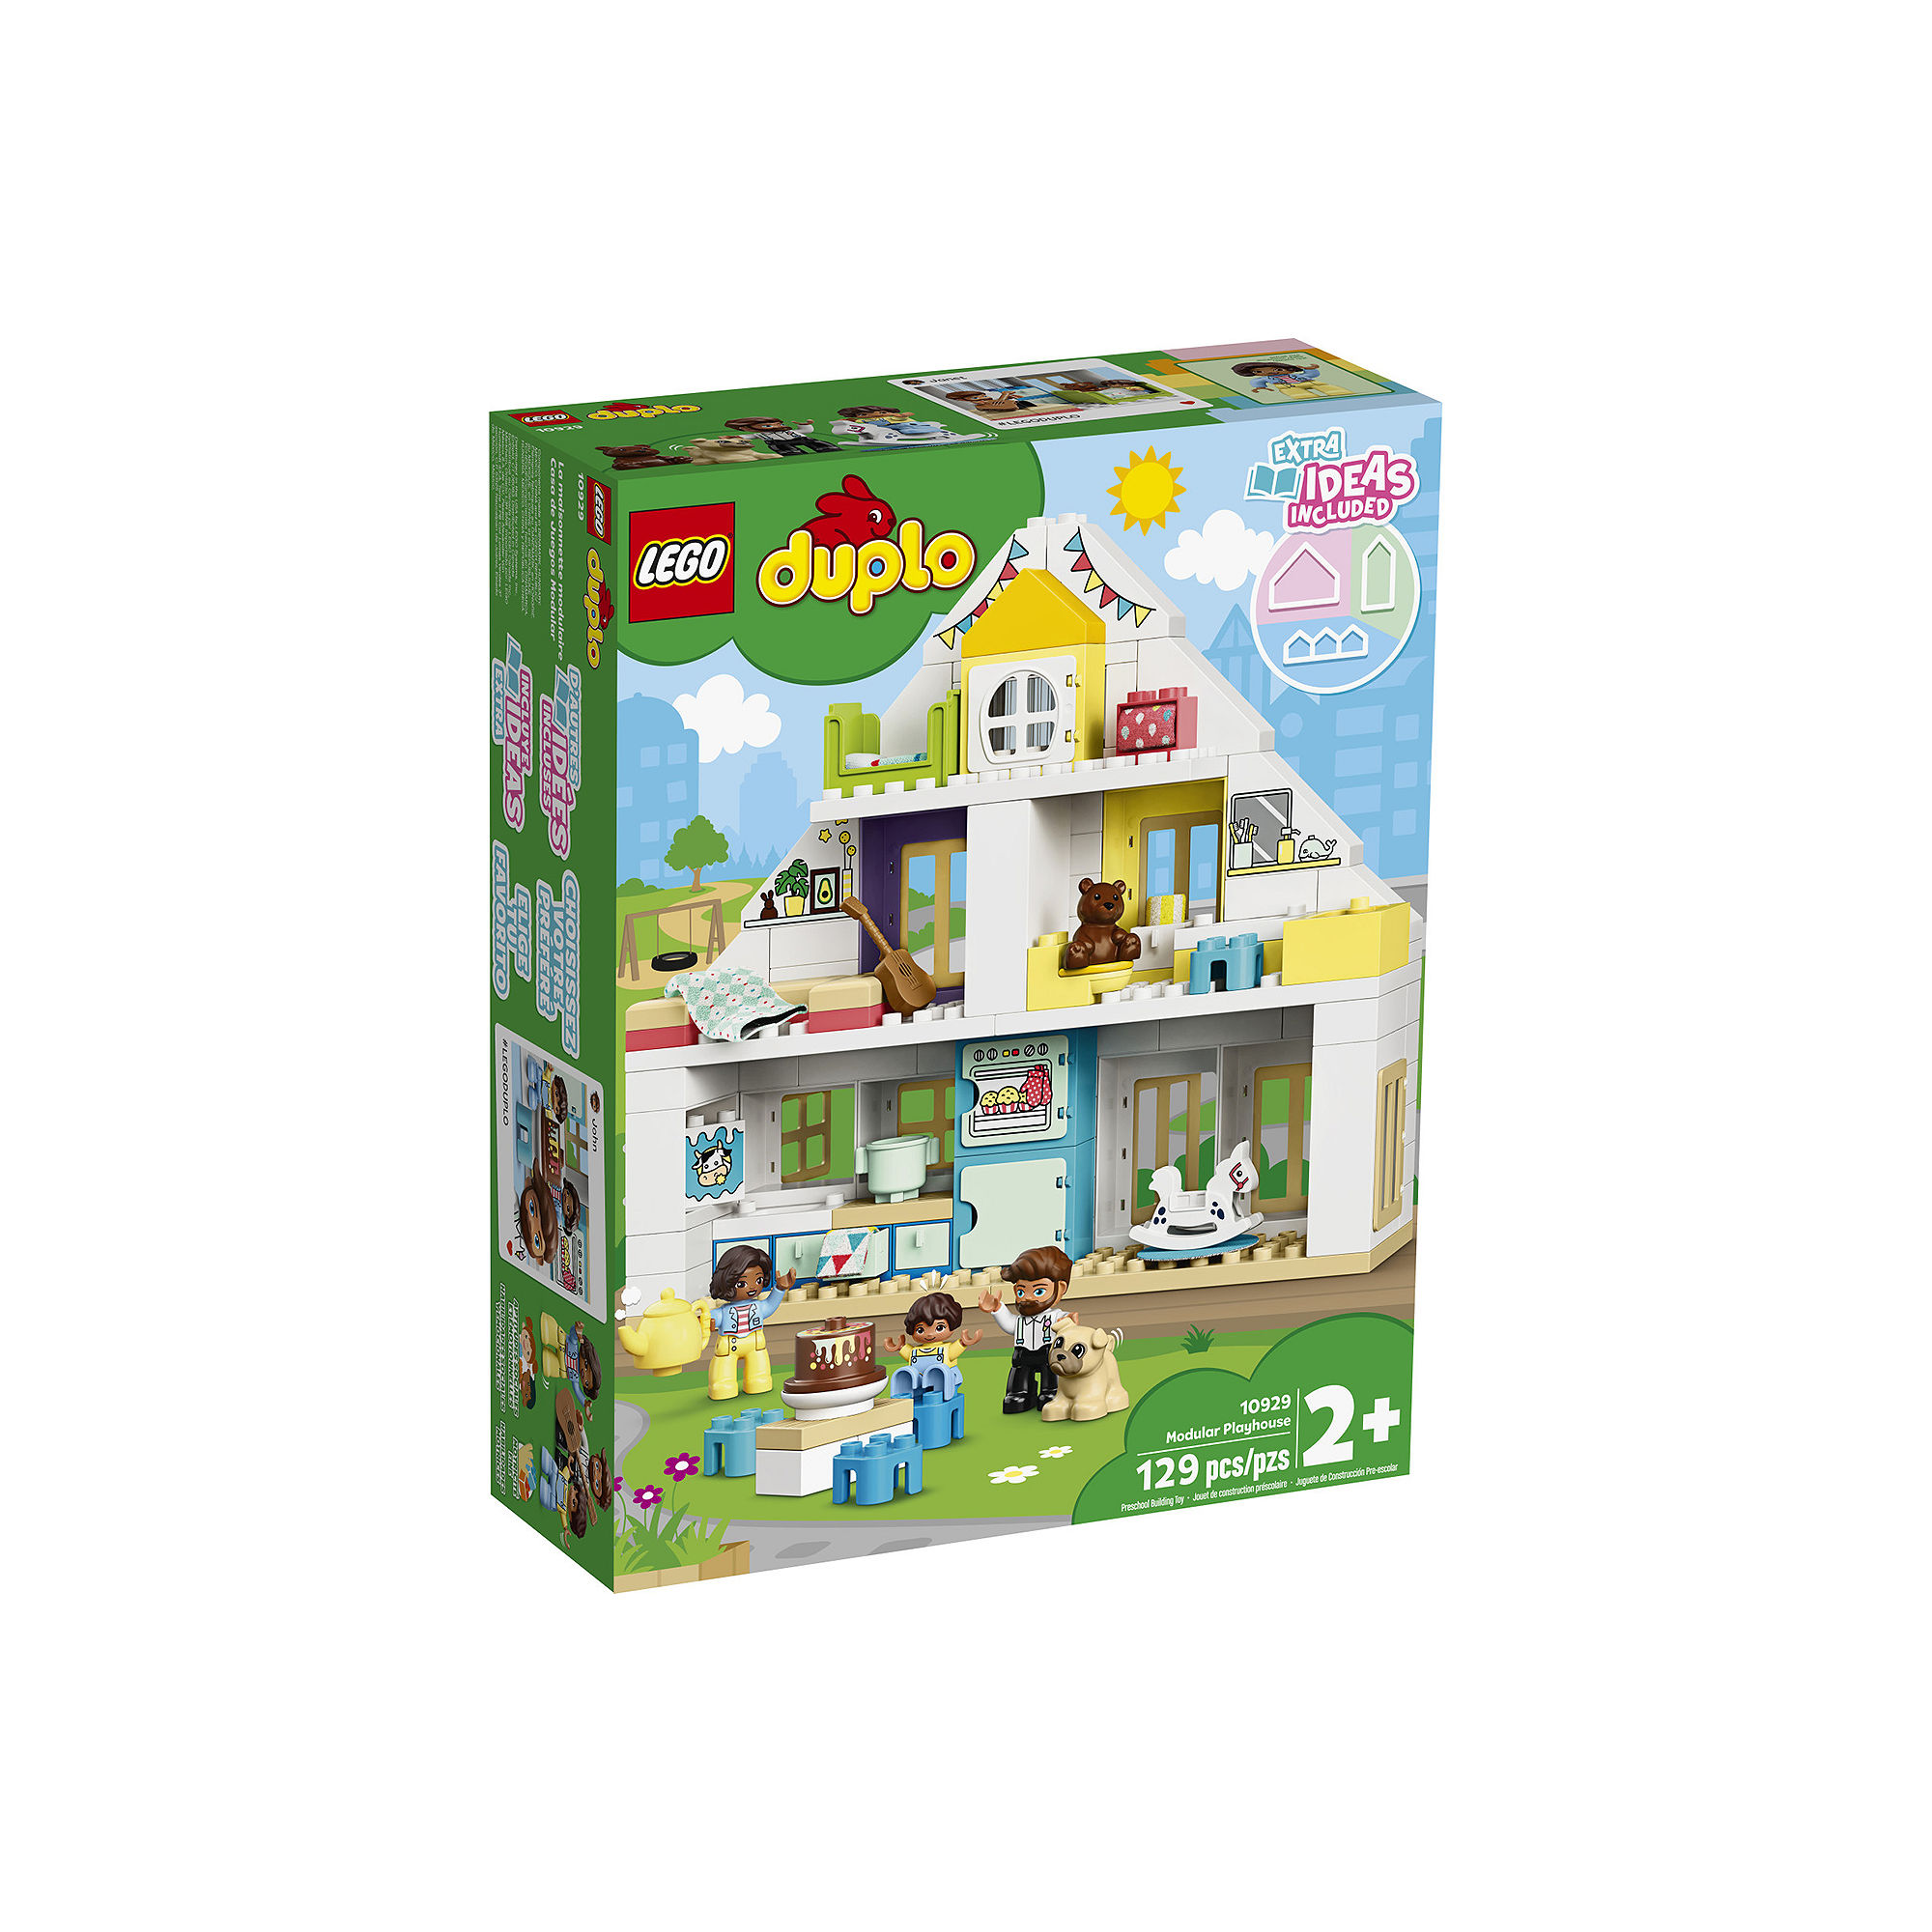 LEGO 6288675 DUPLO Town Modular Playhouse 10929 Building Set for Toddlers, 129 Pieces - image 3 of 6